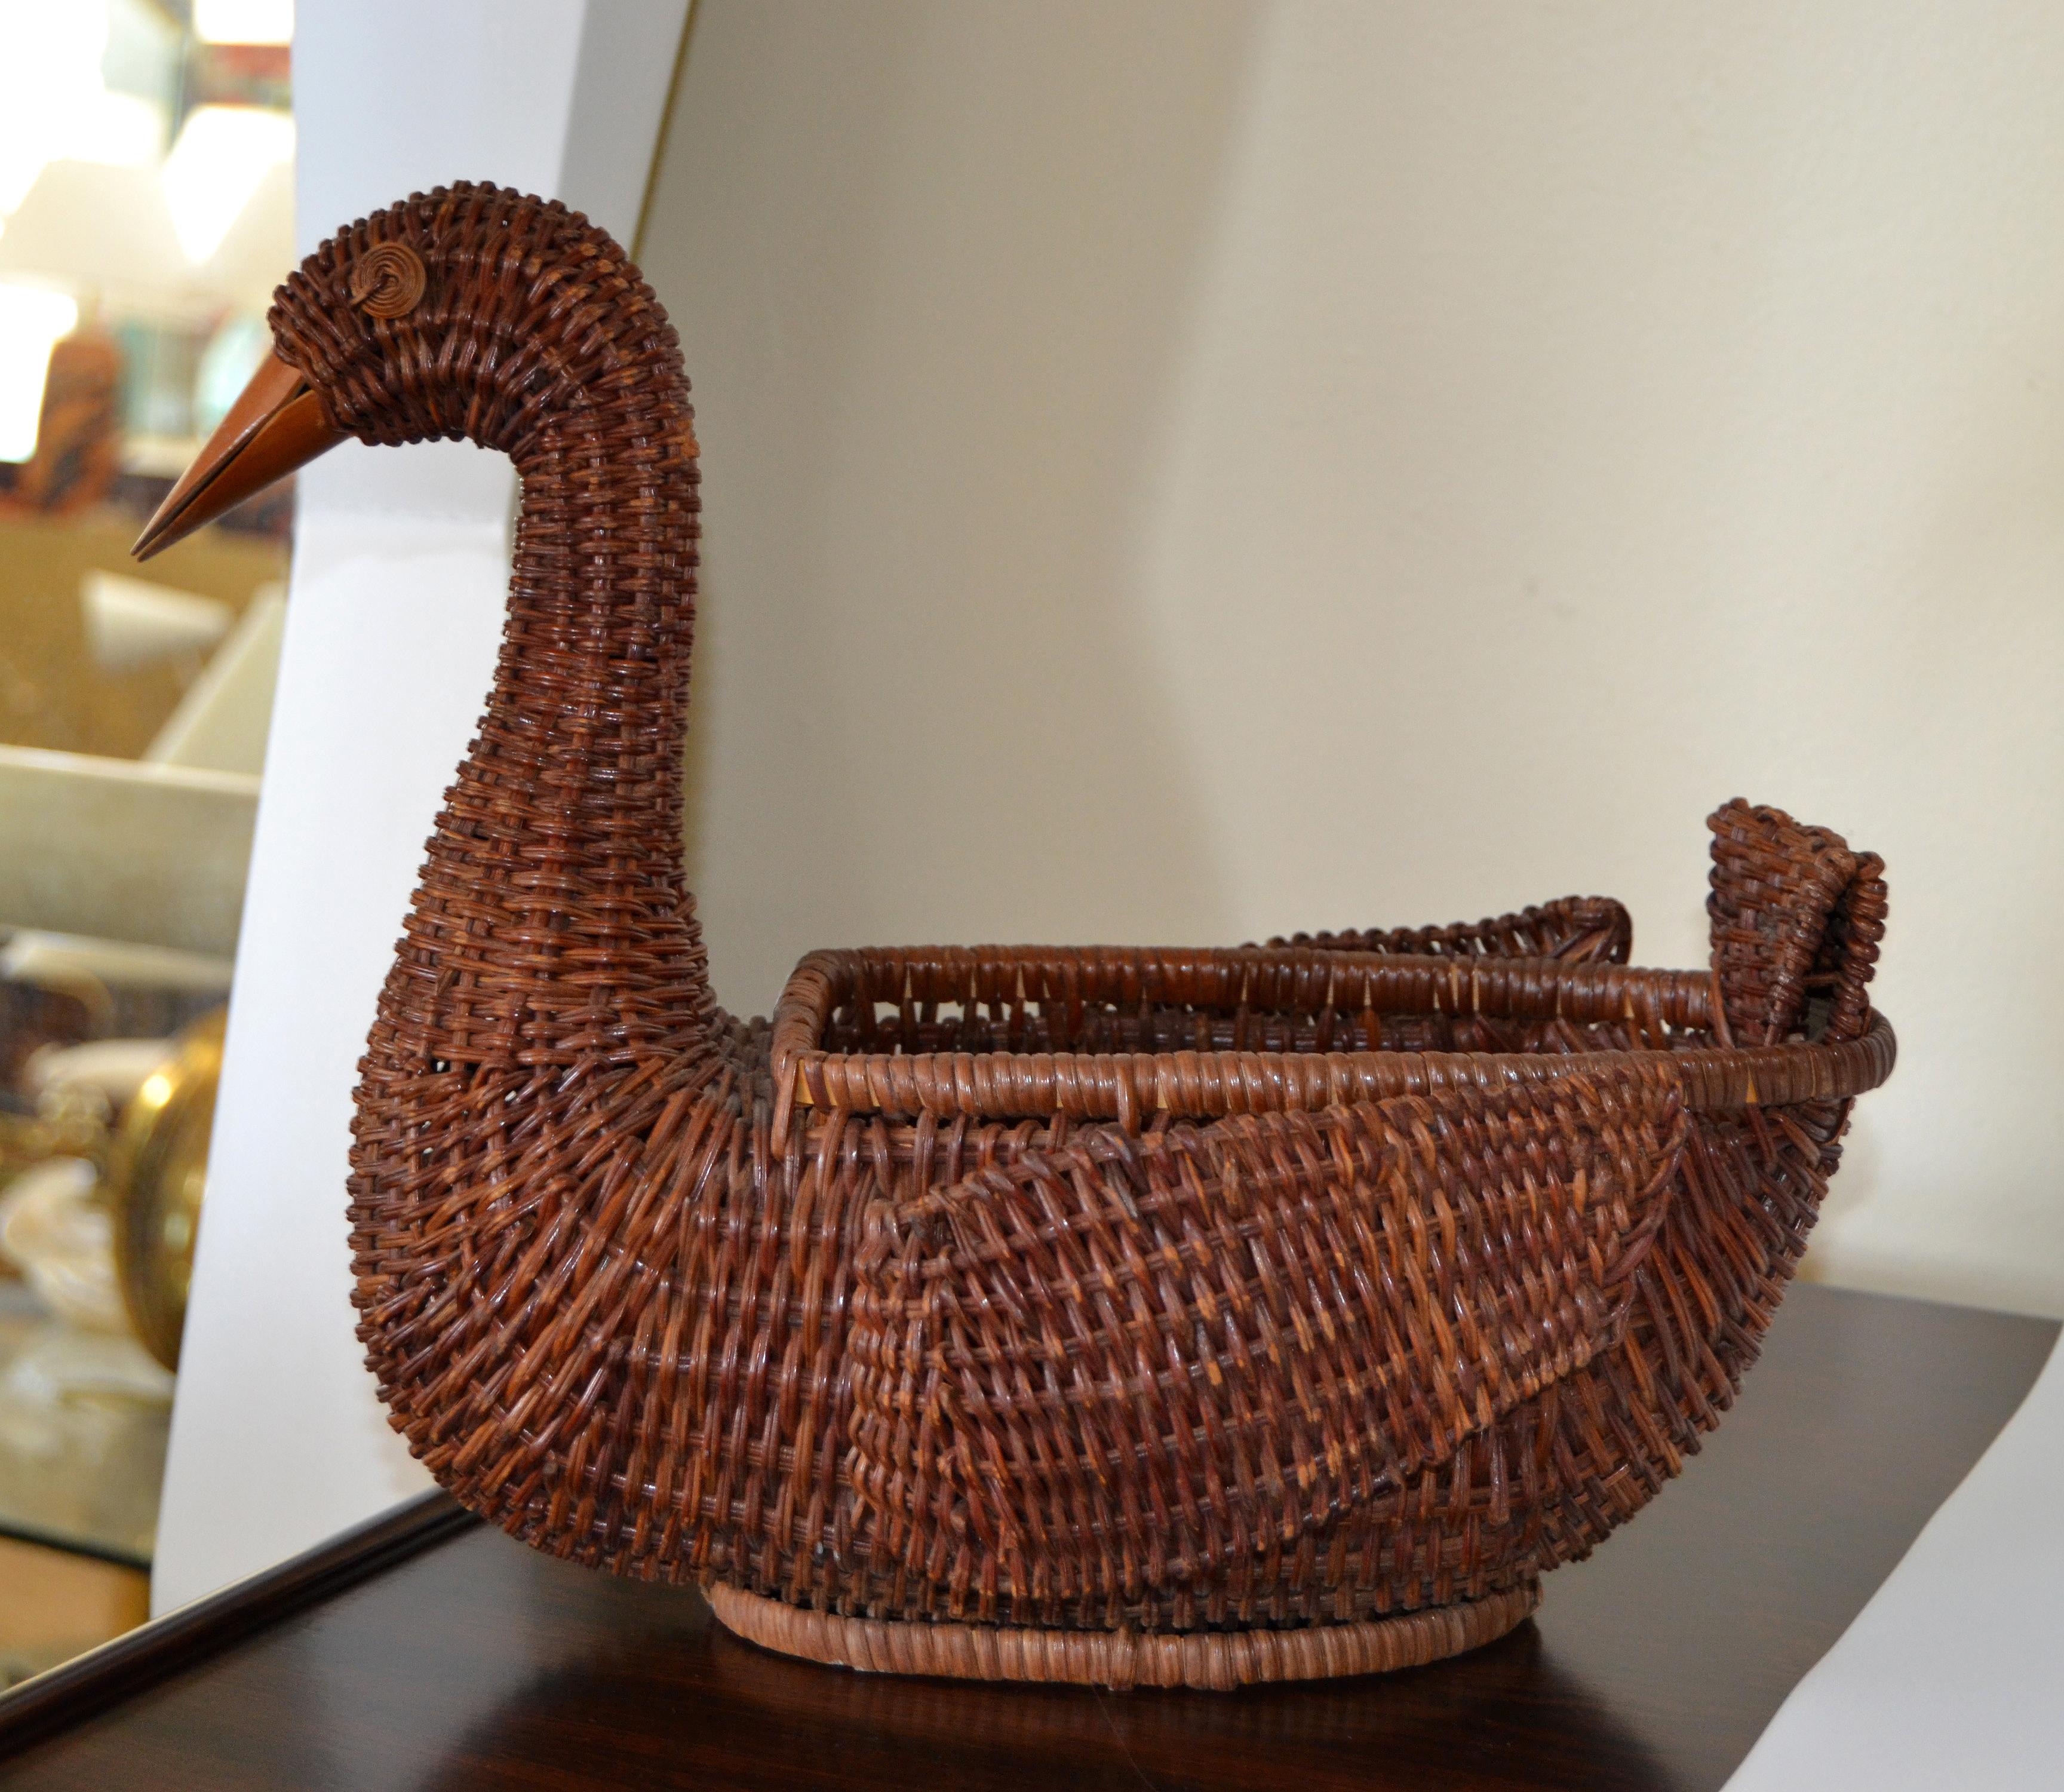 Boho Chic Decorative Handcrafted Woven Reed Brown Duck Basket, Animal Sculpture  8